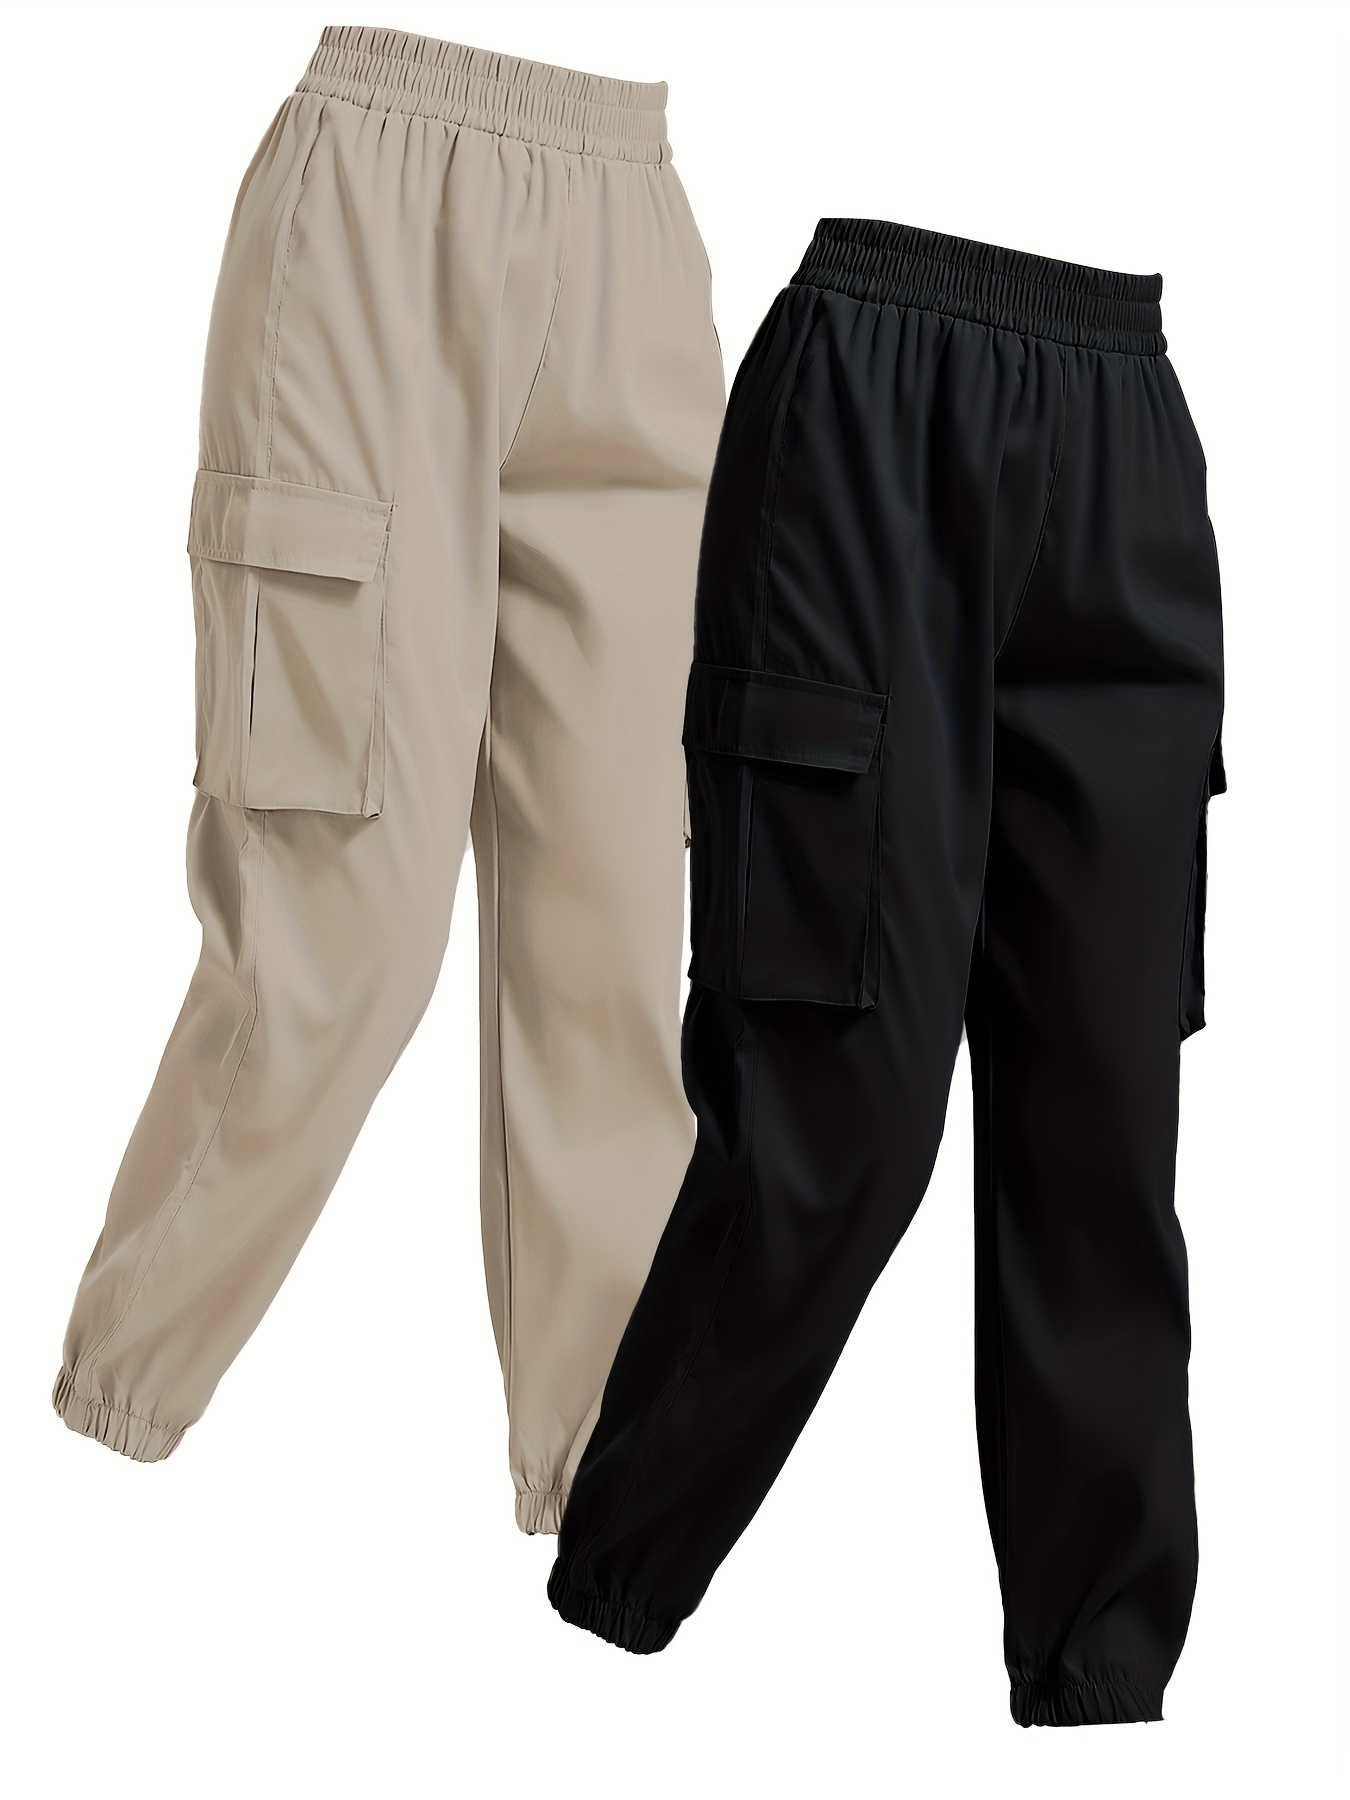 solid jogger cargo pants 2 pack casual flap pocket elastic waist pants womens clothing details 6